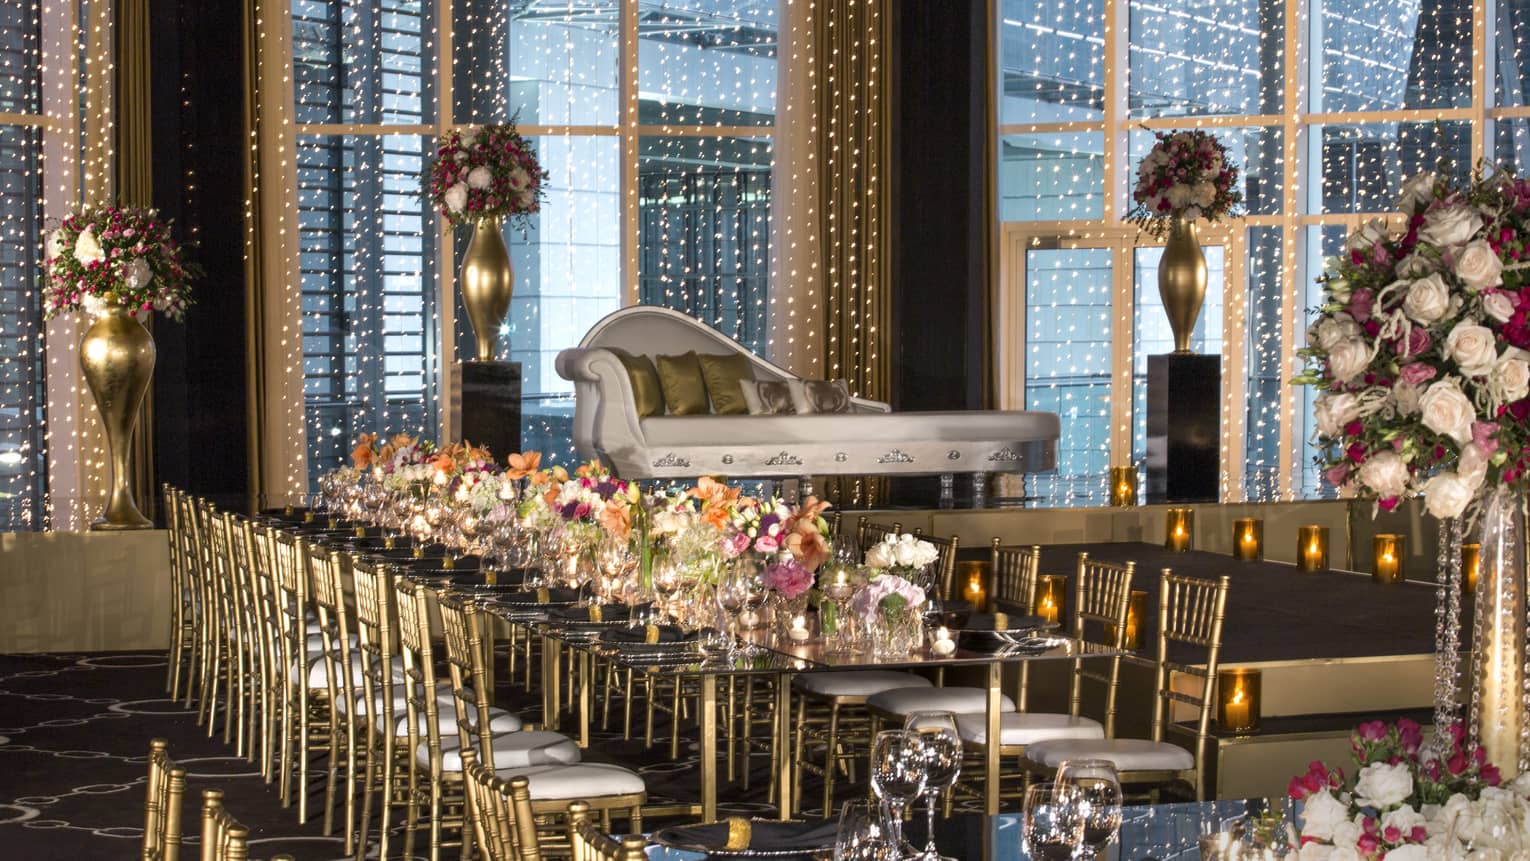 Wedding banquet table with flower arrangements, gold chairs and chaise below window with string lights 